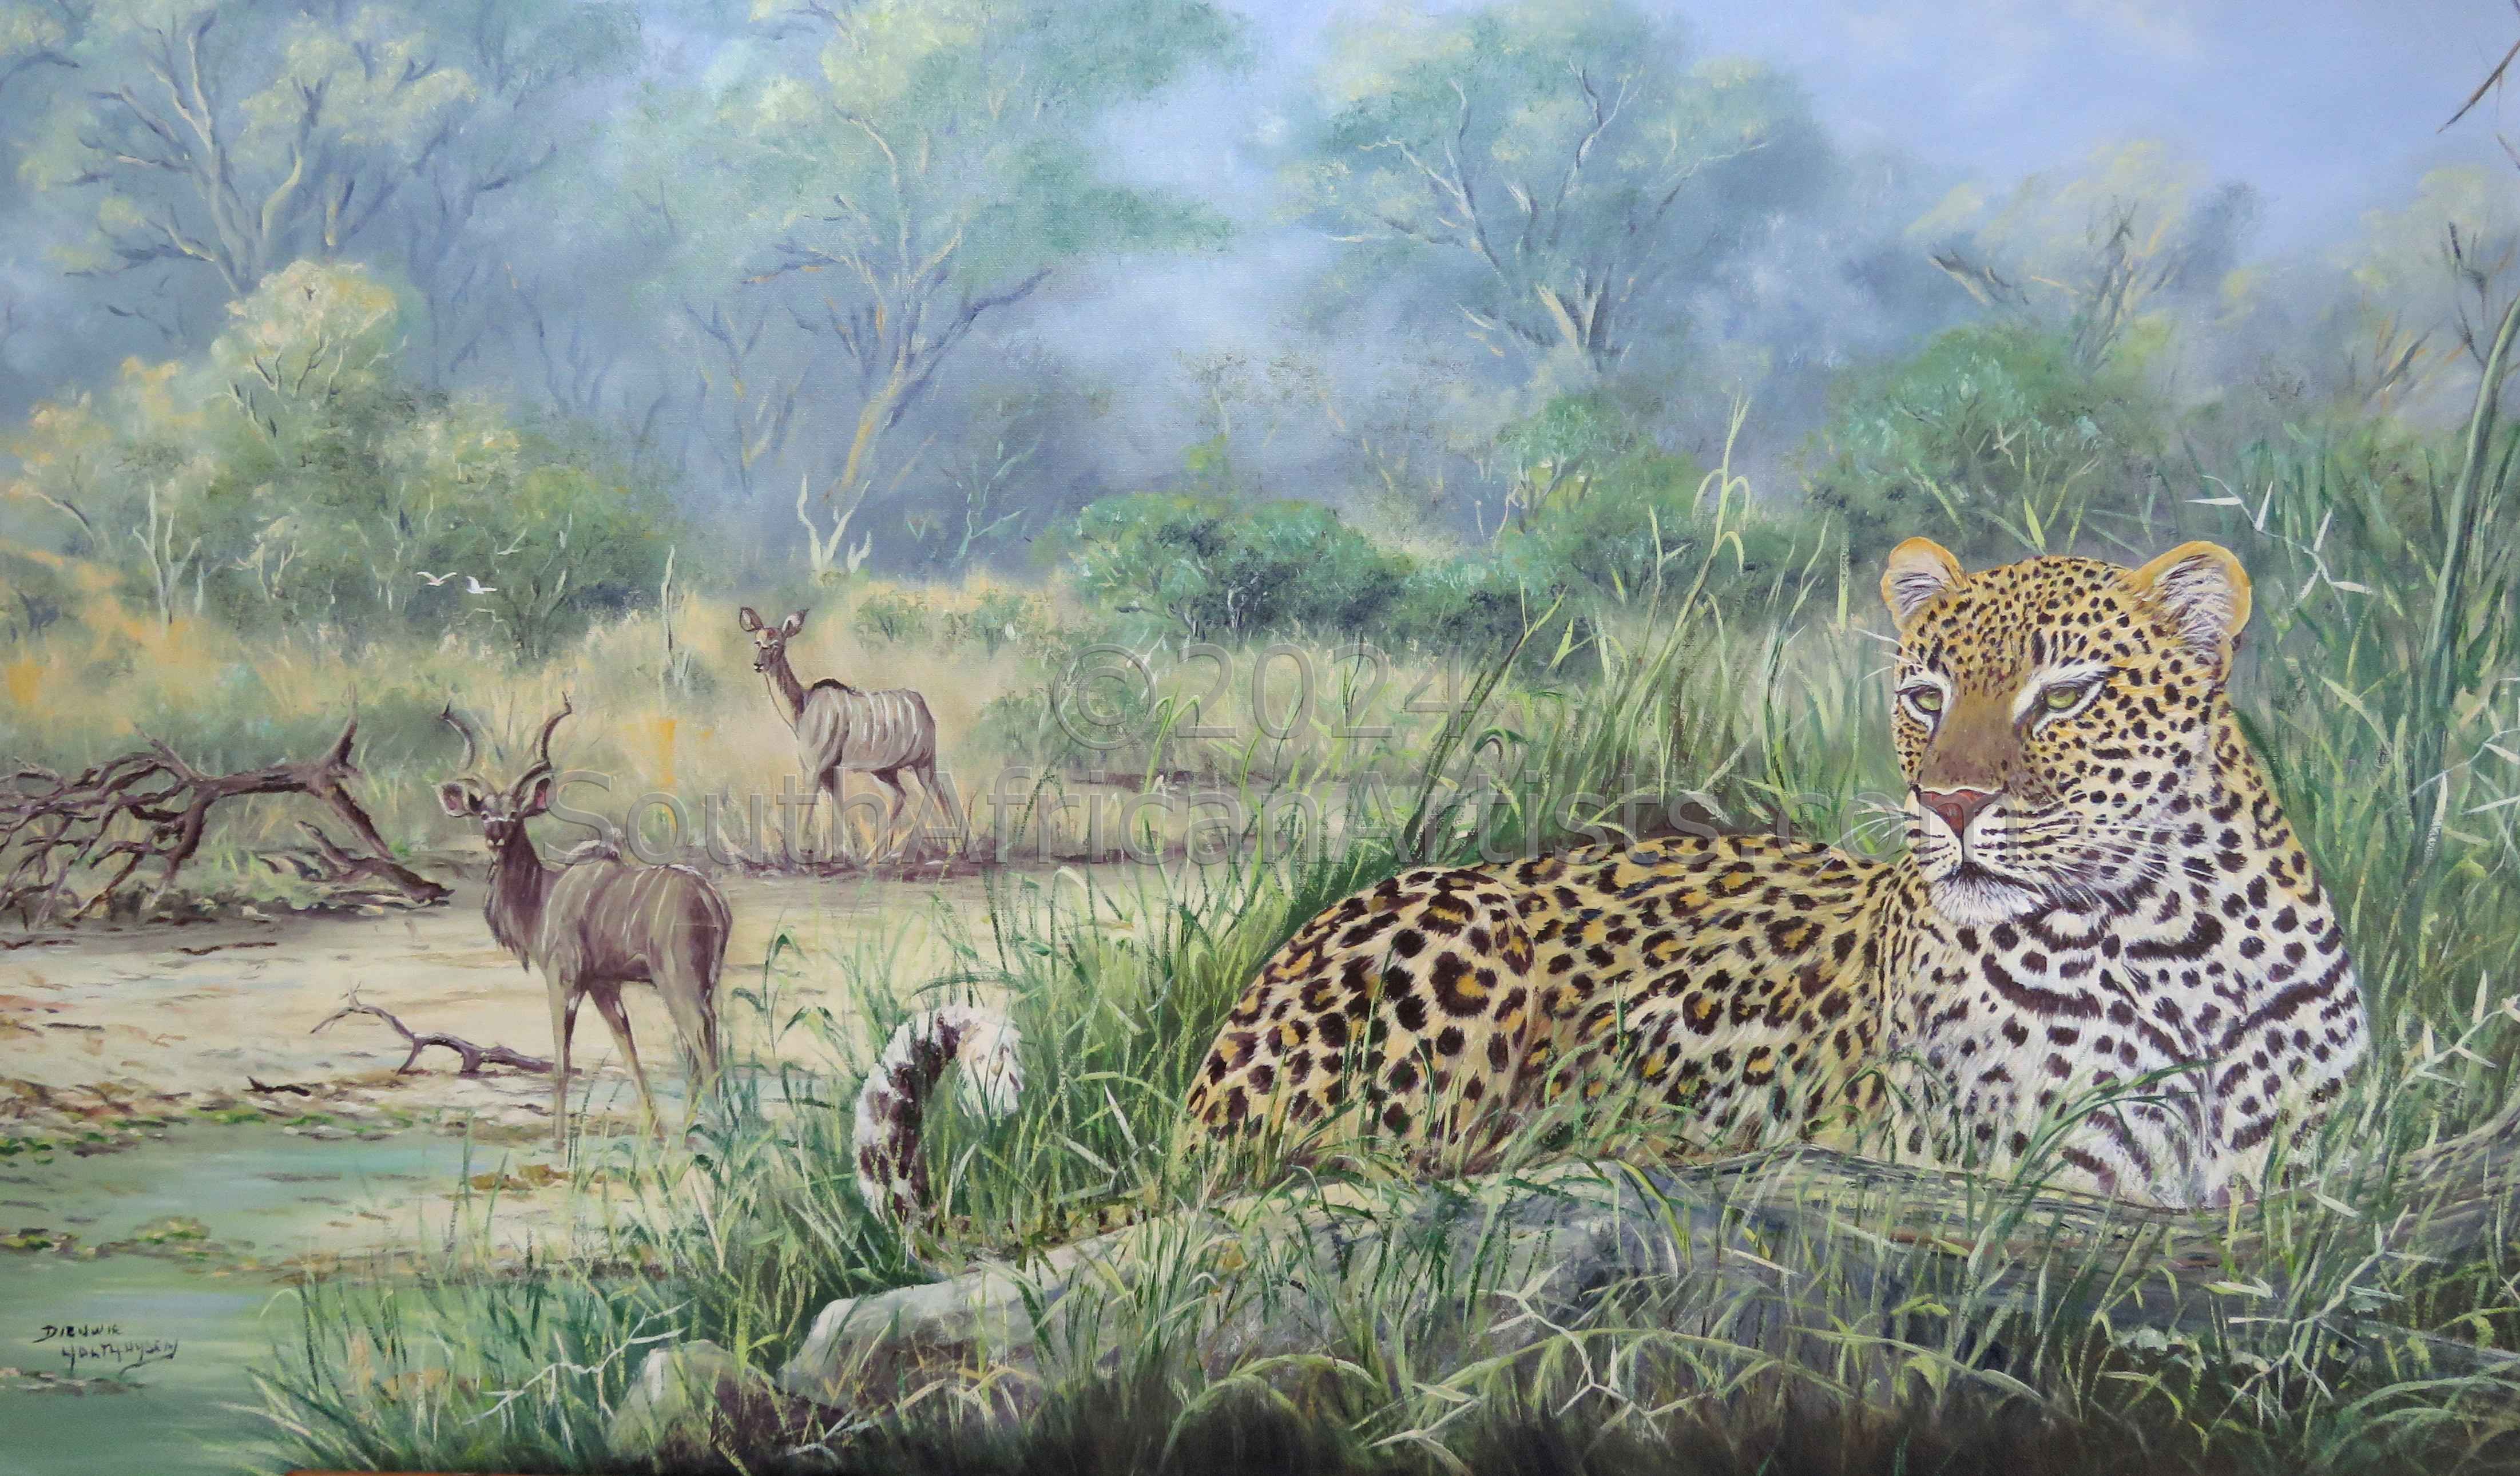 The Resting Leopard